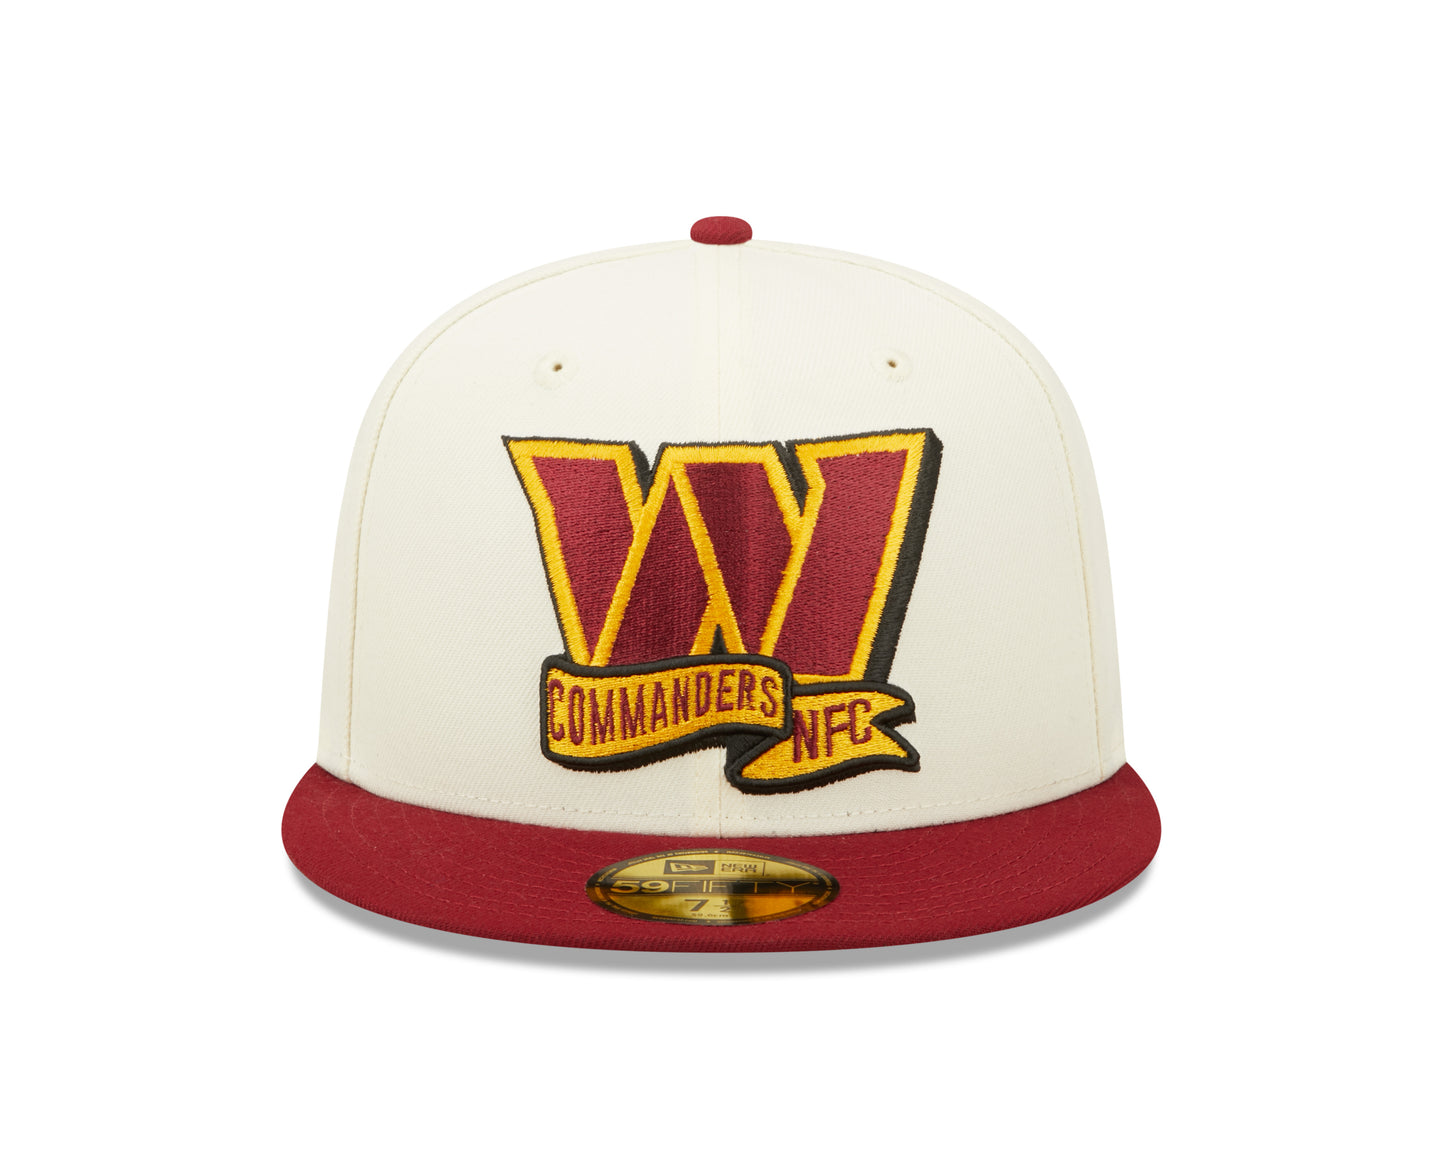 Washington Commanders New Era NFL Sideline 59fifty Fitted Hat- Cream